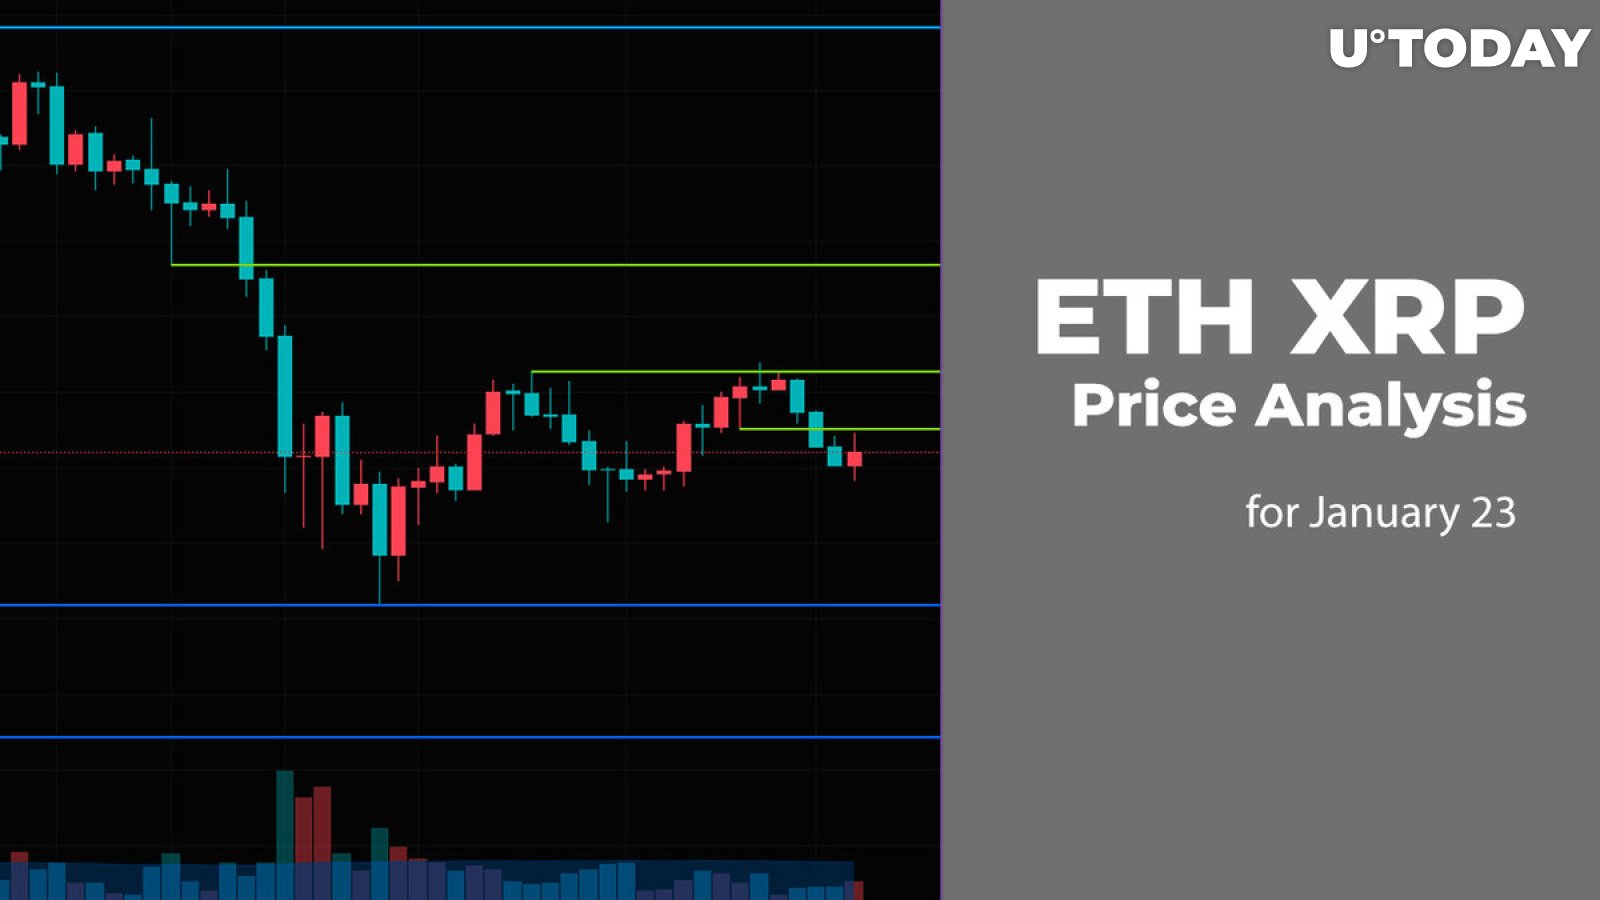 ETH and XRP Price Analysis for January 23